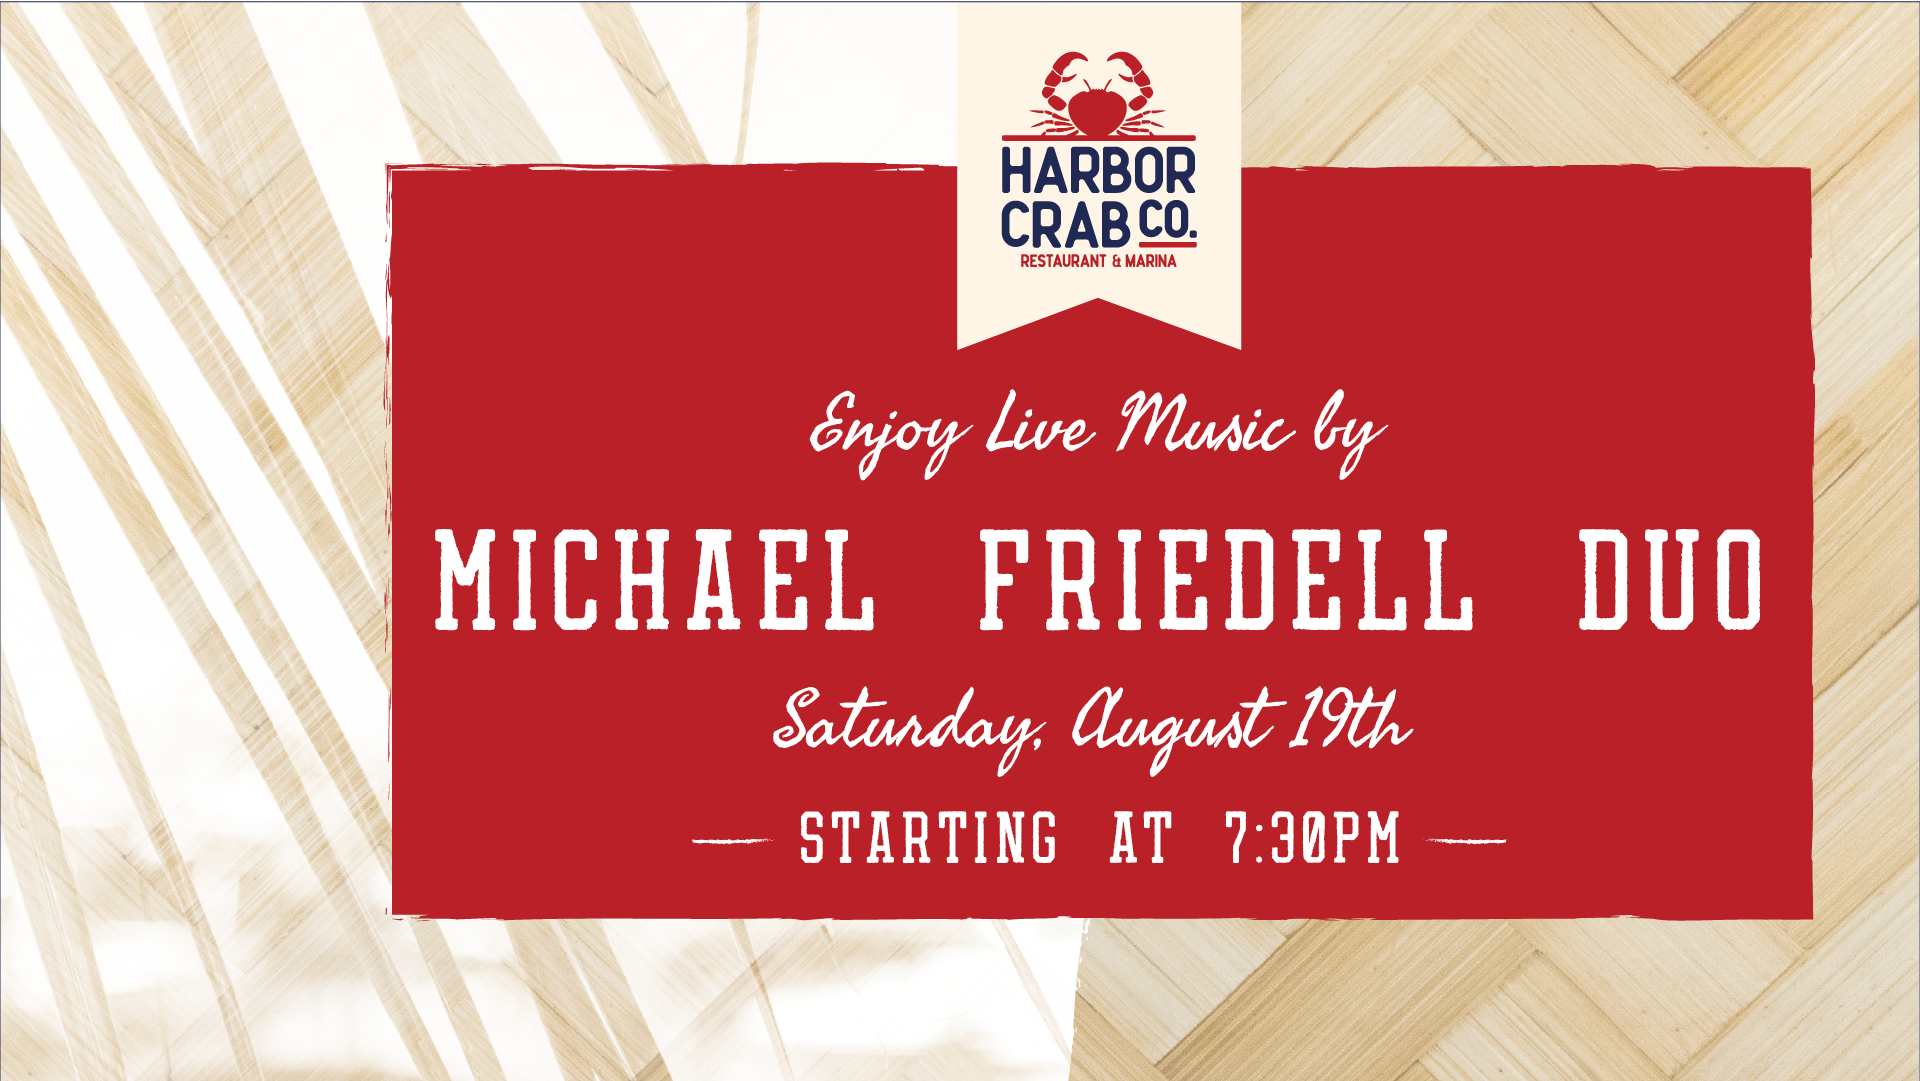 Live Music with Michael Friedell Duo on Saturday, August 19th at 7:30pm.